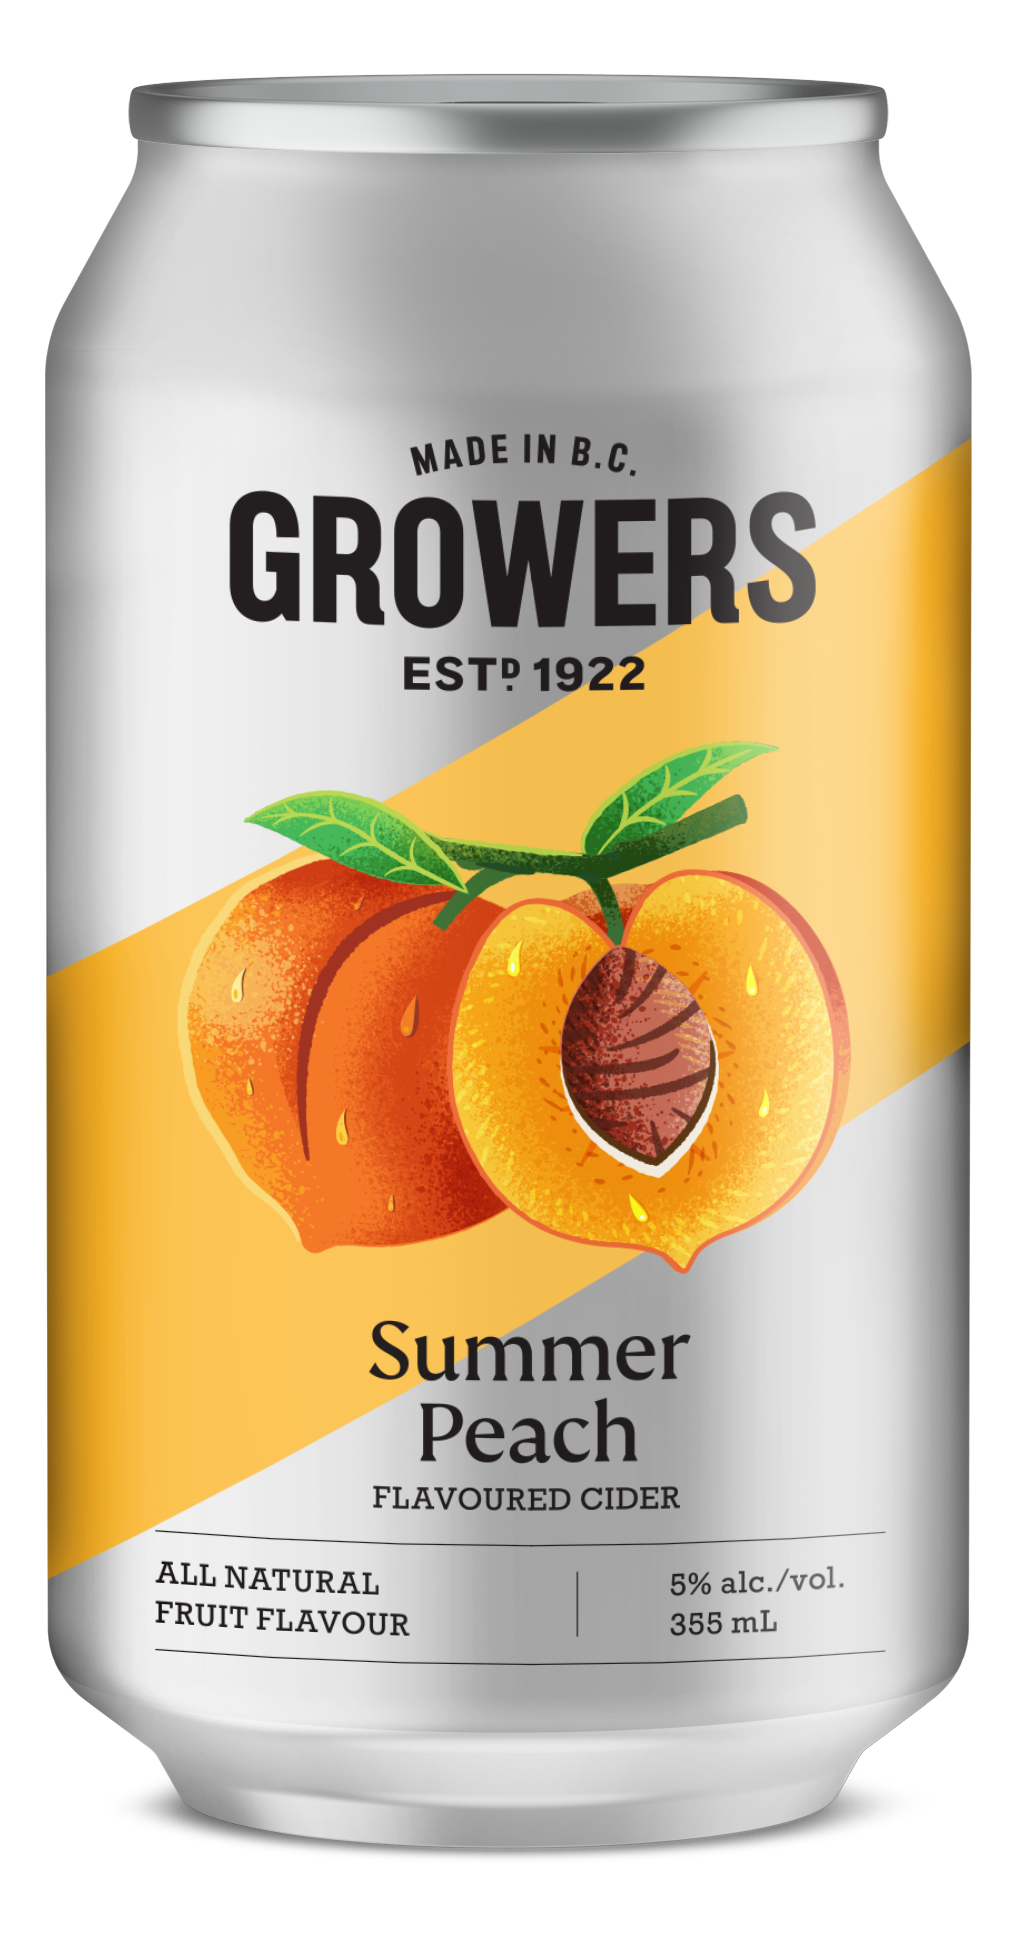 Can of Growers Summer Peach cider